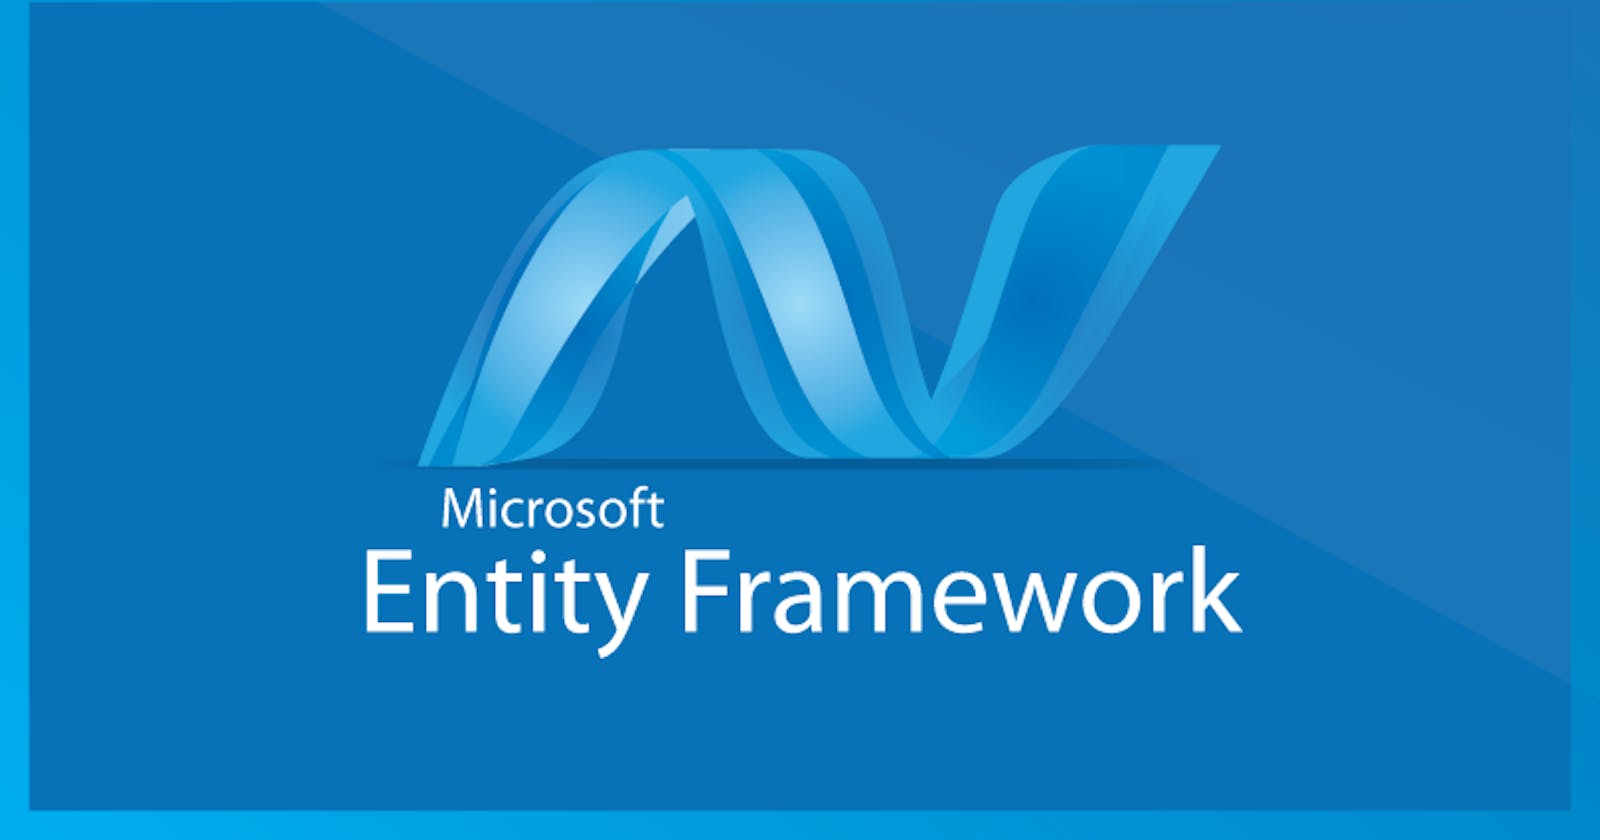 Eagerly loading related entities in Entity Framework